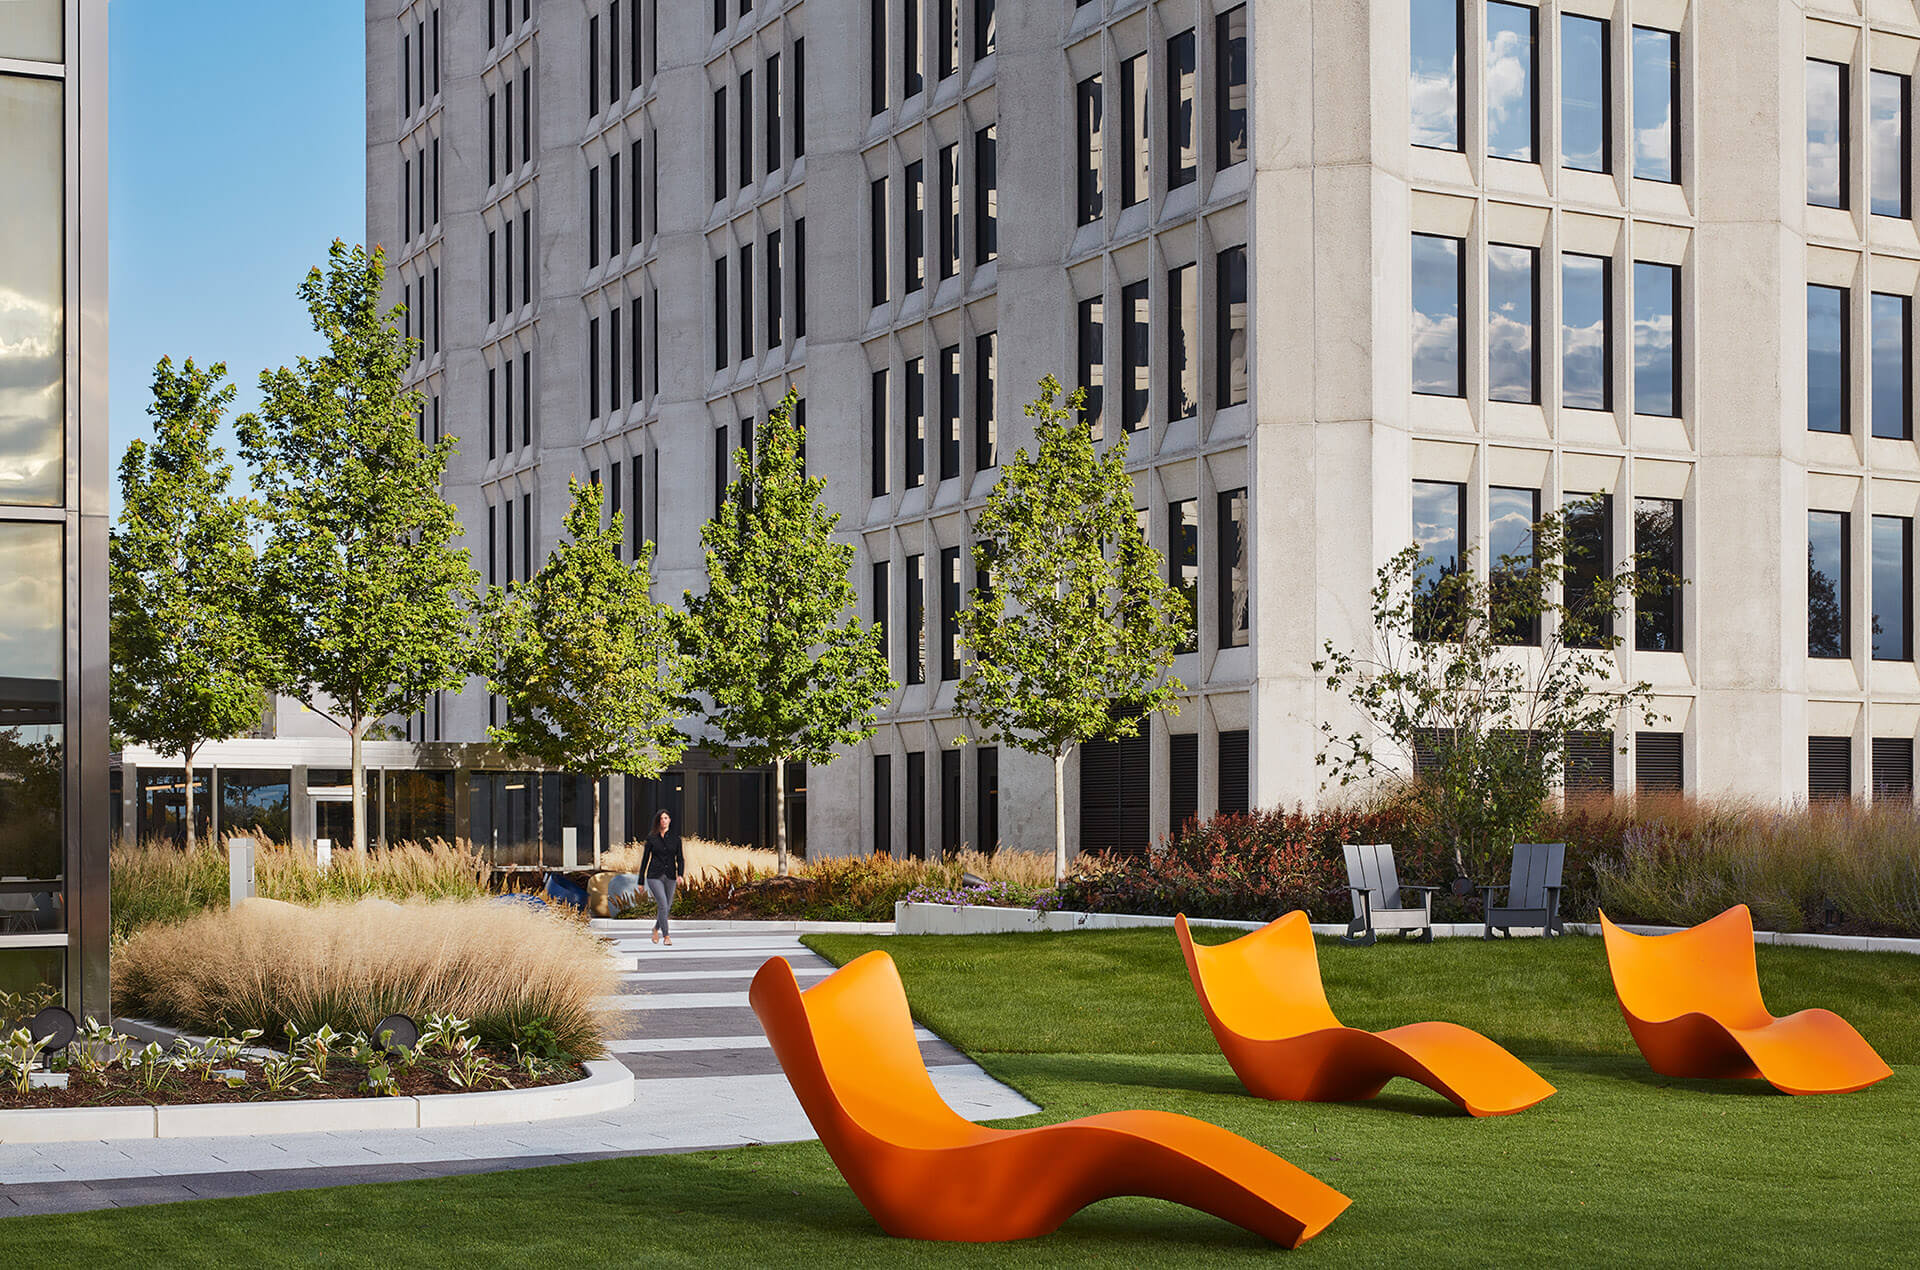 Lawn area outside continental towers with modern orange lounge chairs